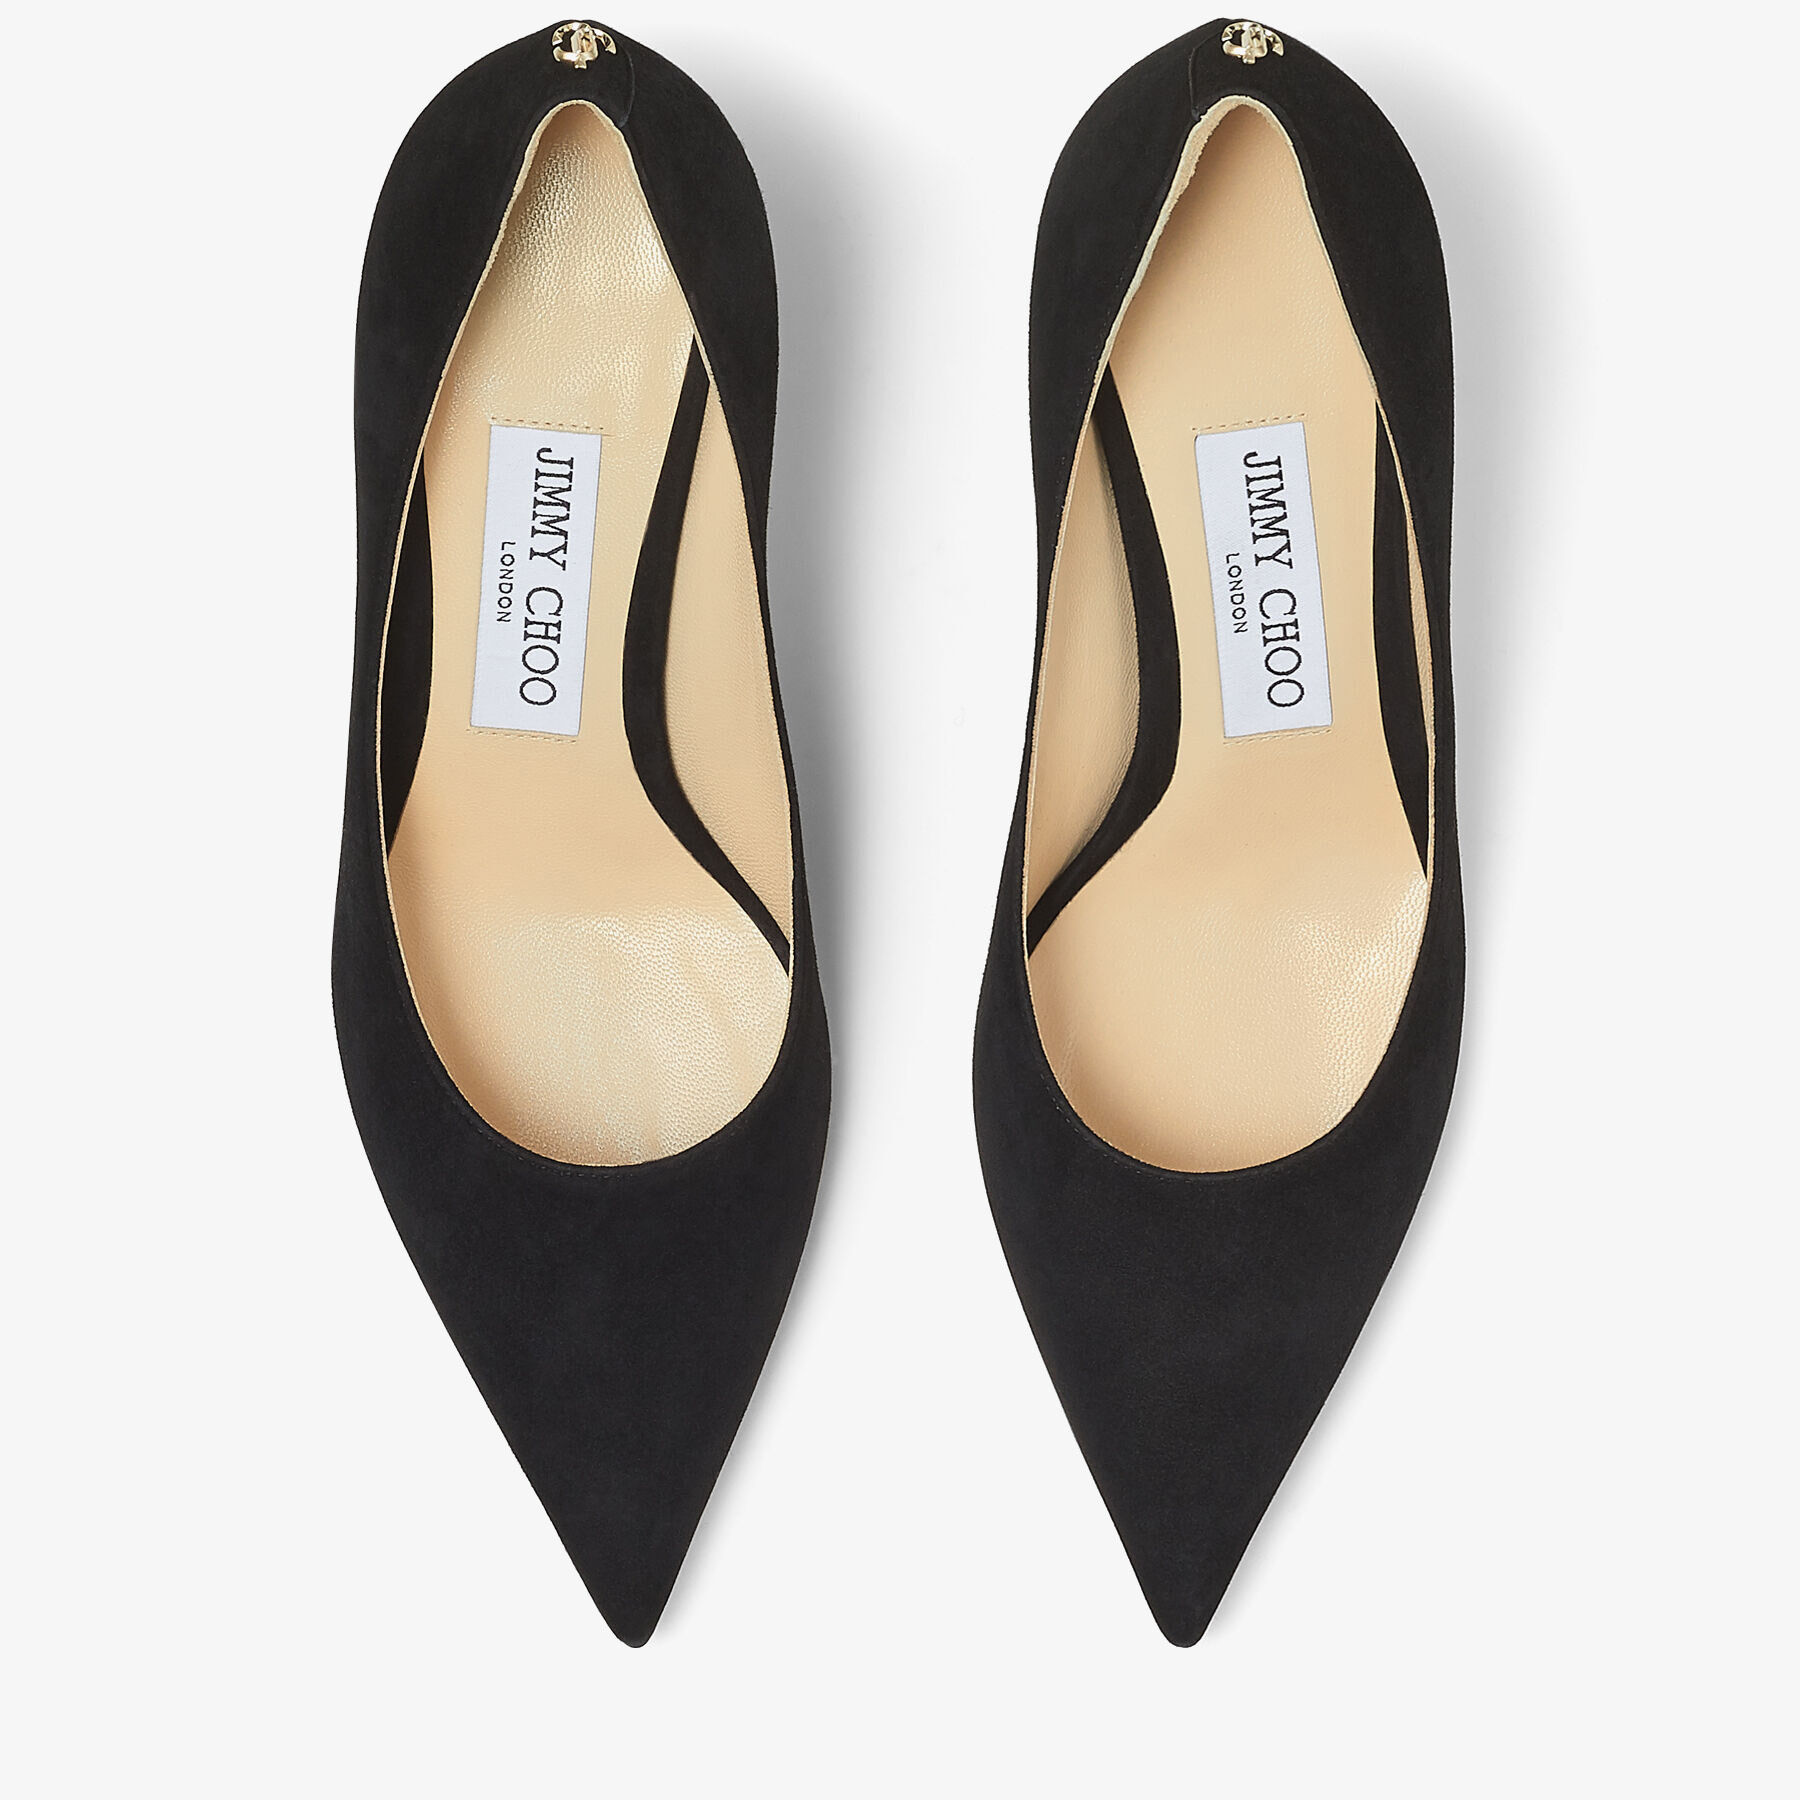 Black Suede Pointed pumps with JC Emblem | LOVE 65 | 24:7 Icons | JIMMY ...